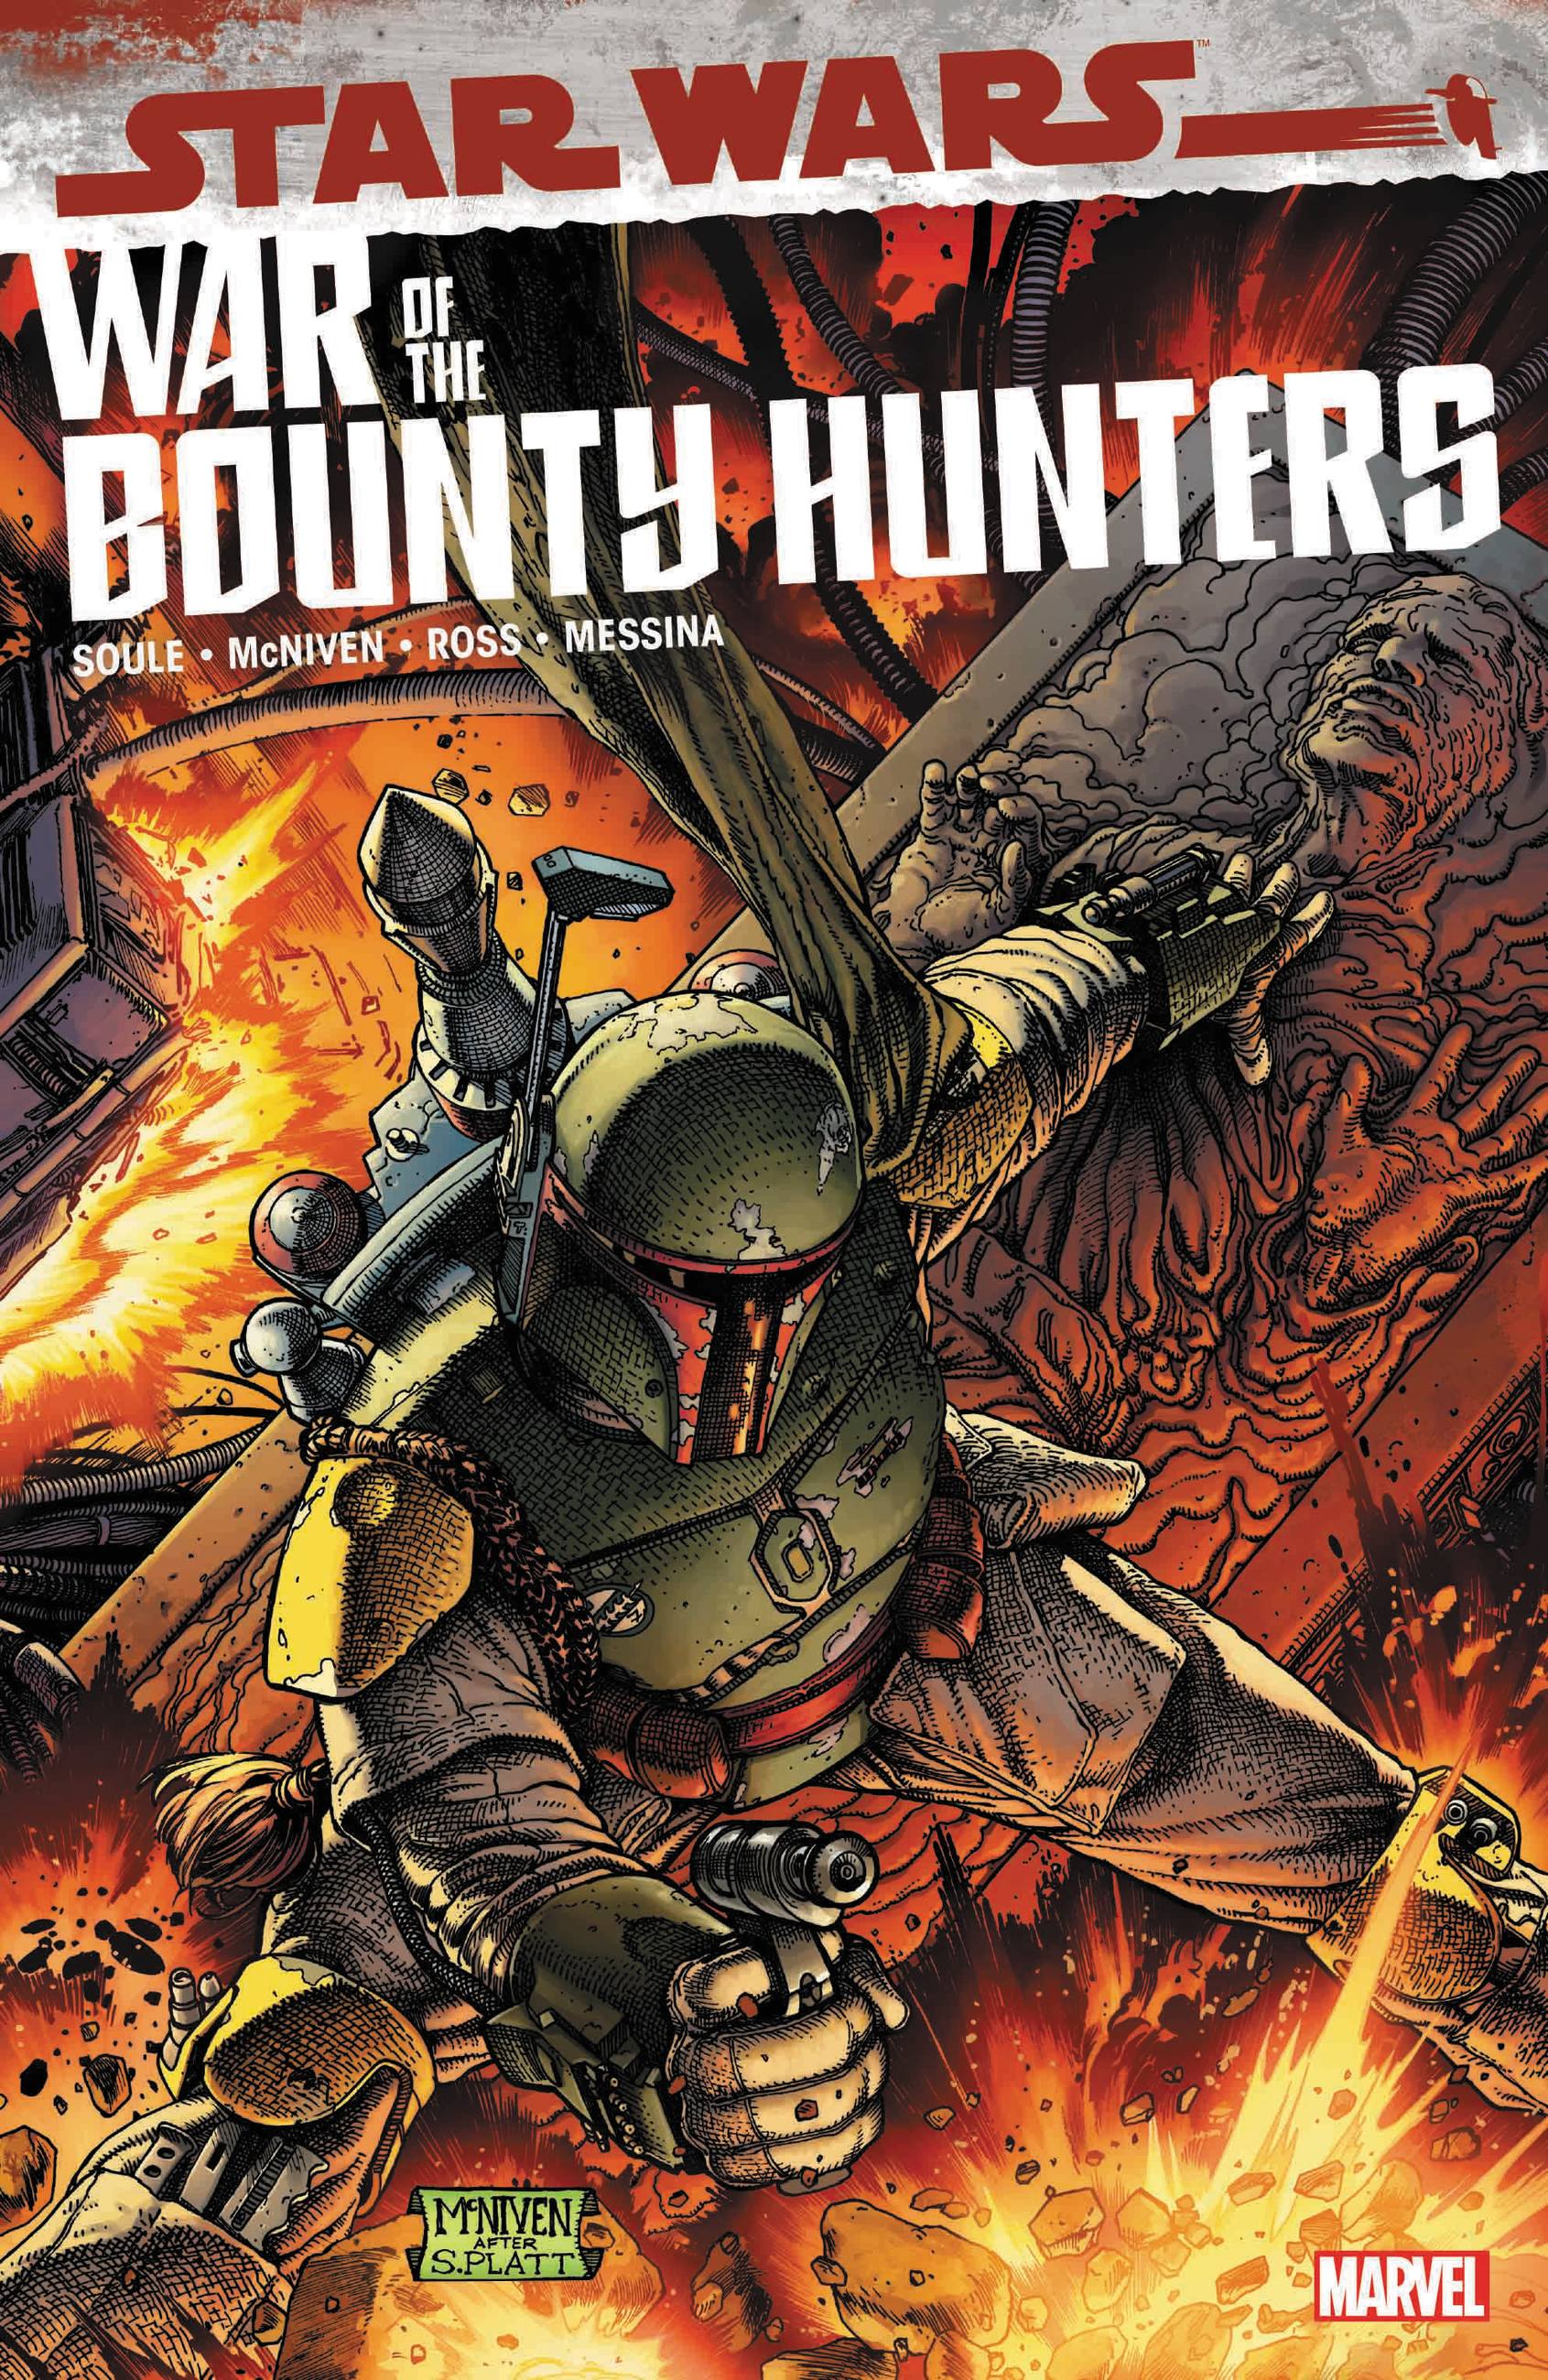 STAR WARS BOUNTY HUNTERS #11 COMIC BOOK ~ Marvel Comics SPROUSE VARIANT